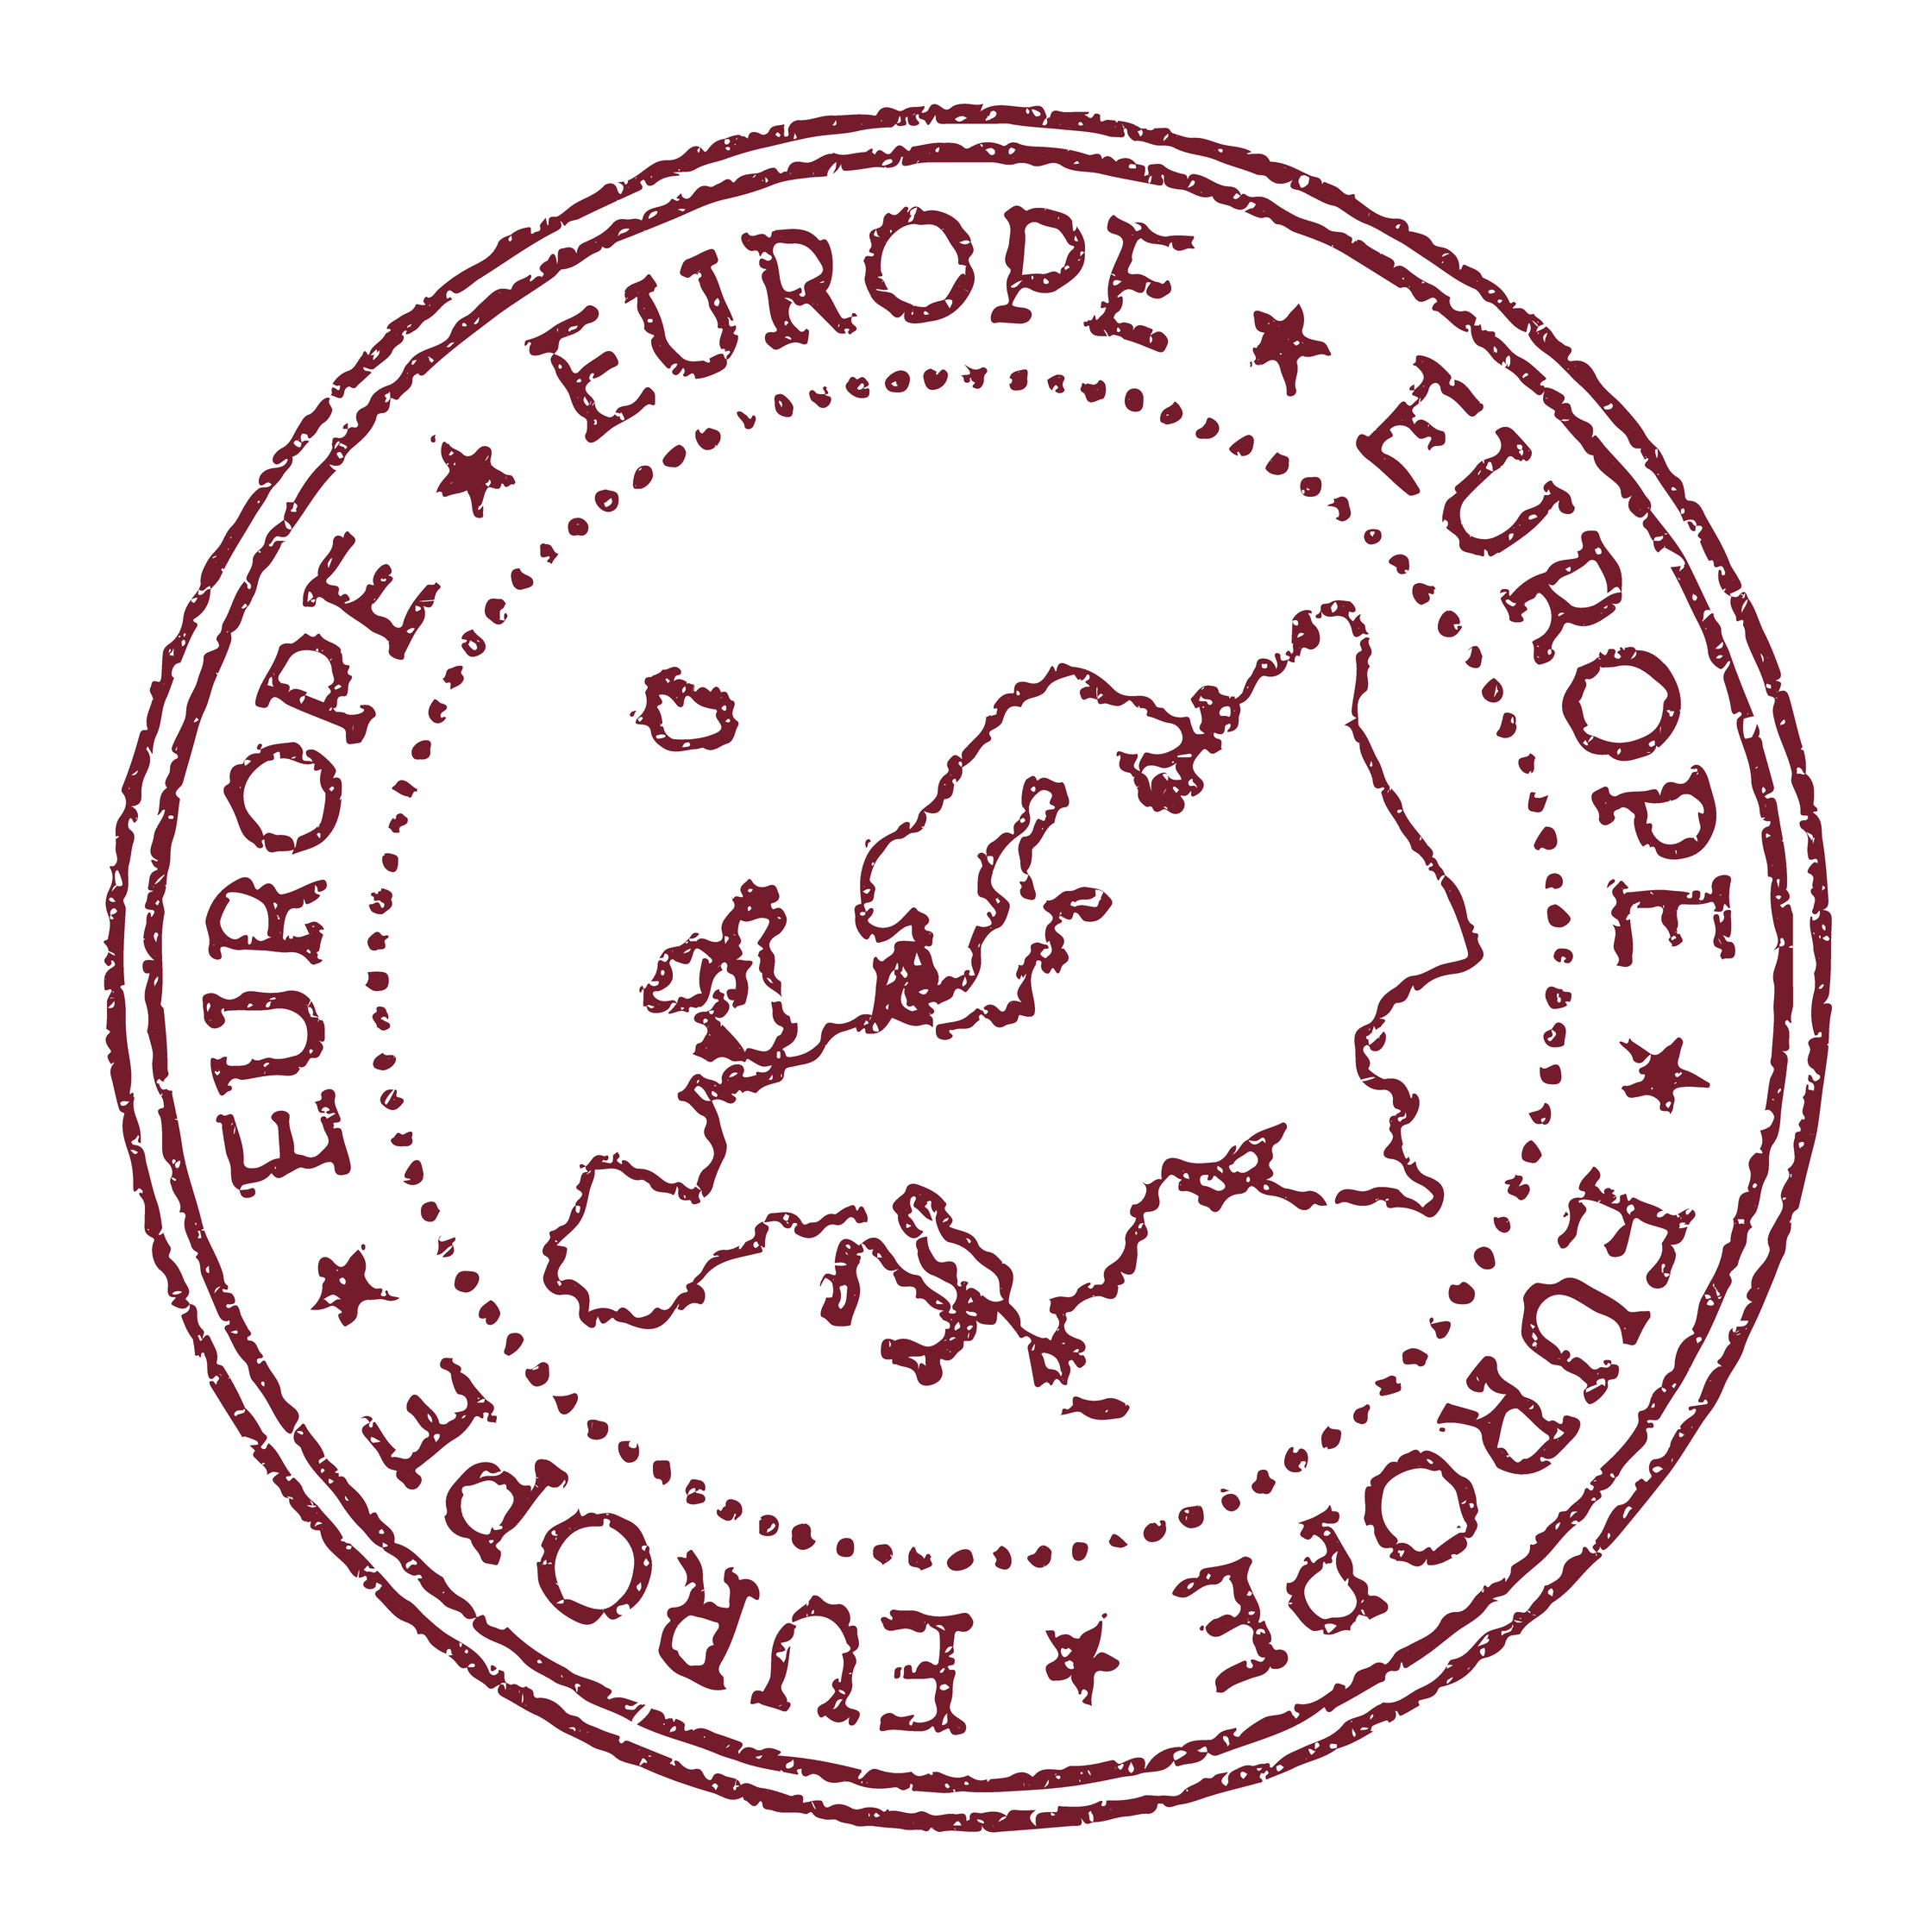 Destinations Round Rubber Postage Stamp, with an outline of the continent in the centre, and the word Europe written around the edge of the circle.